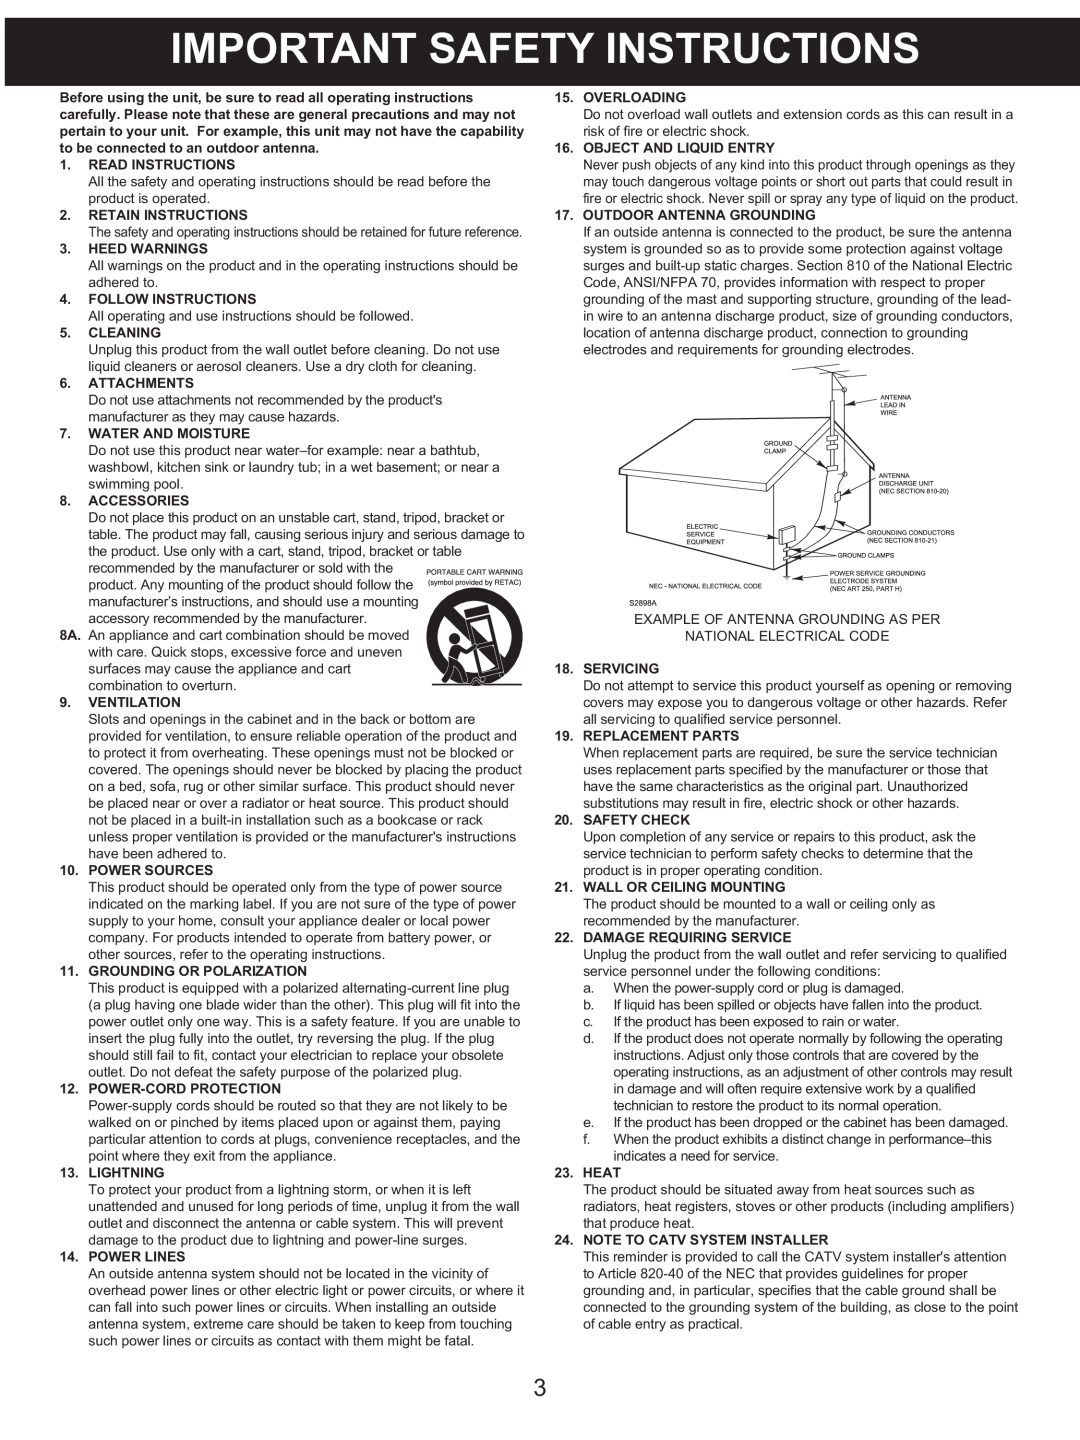 Memorex MX4139 manual Important Safety Instructions 